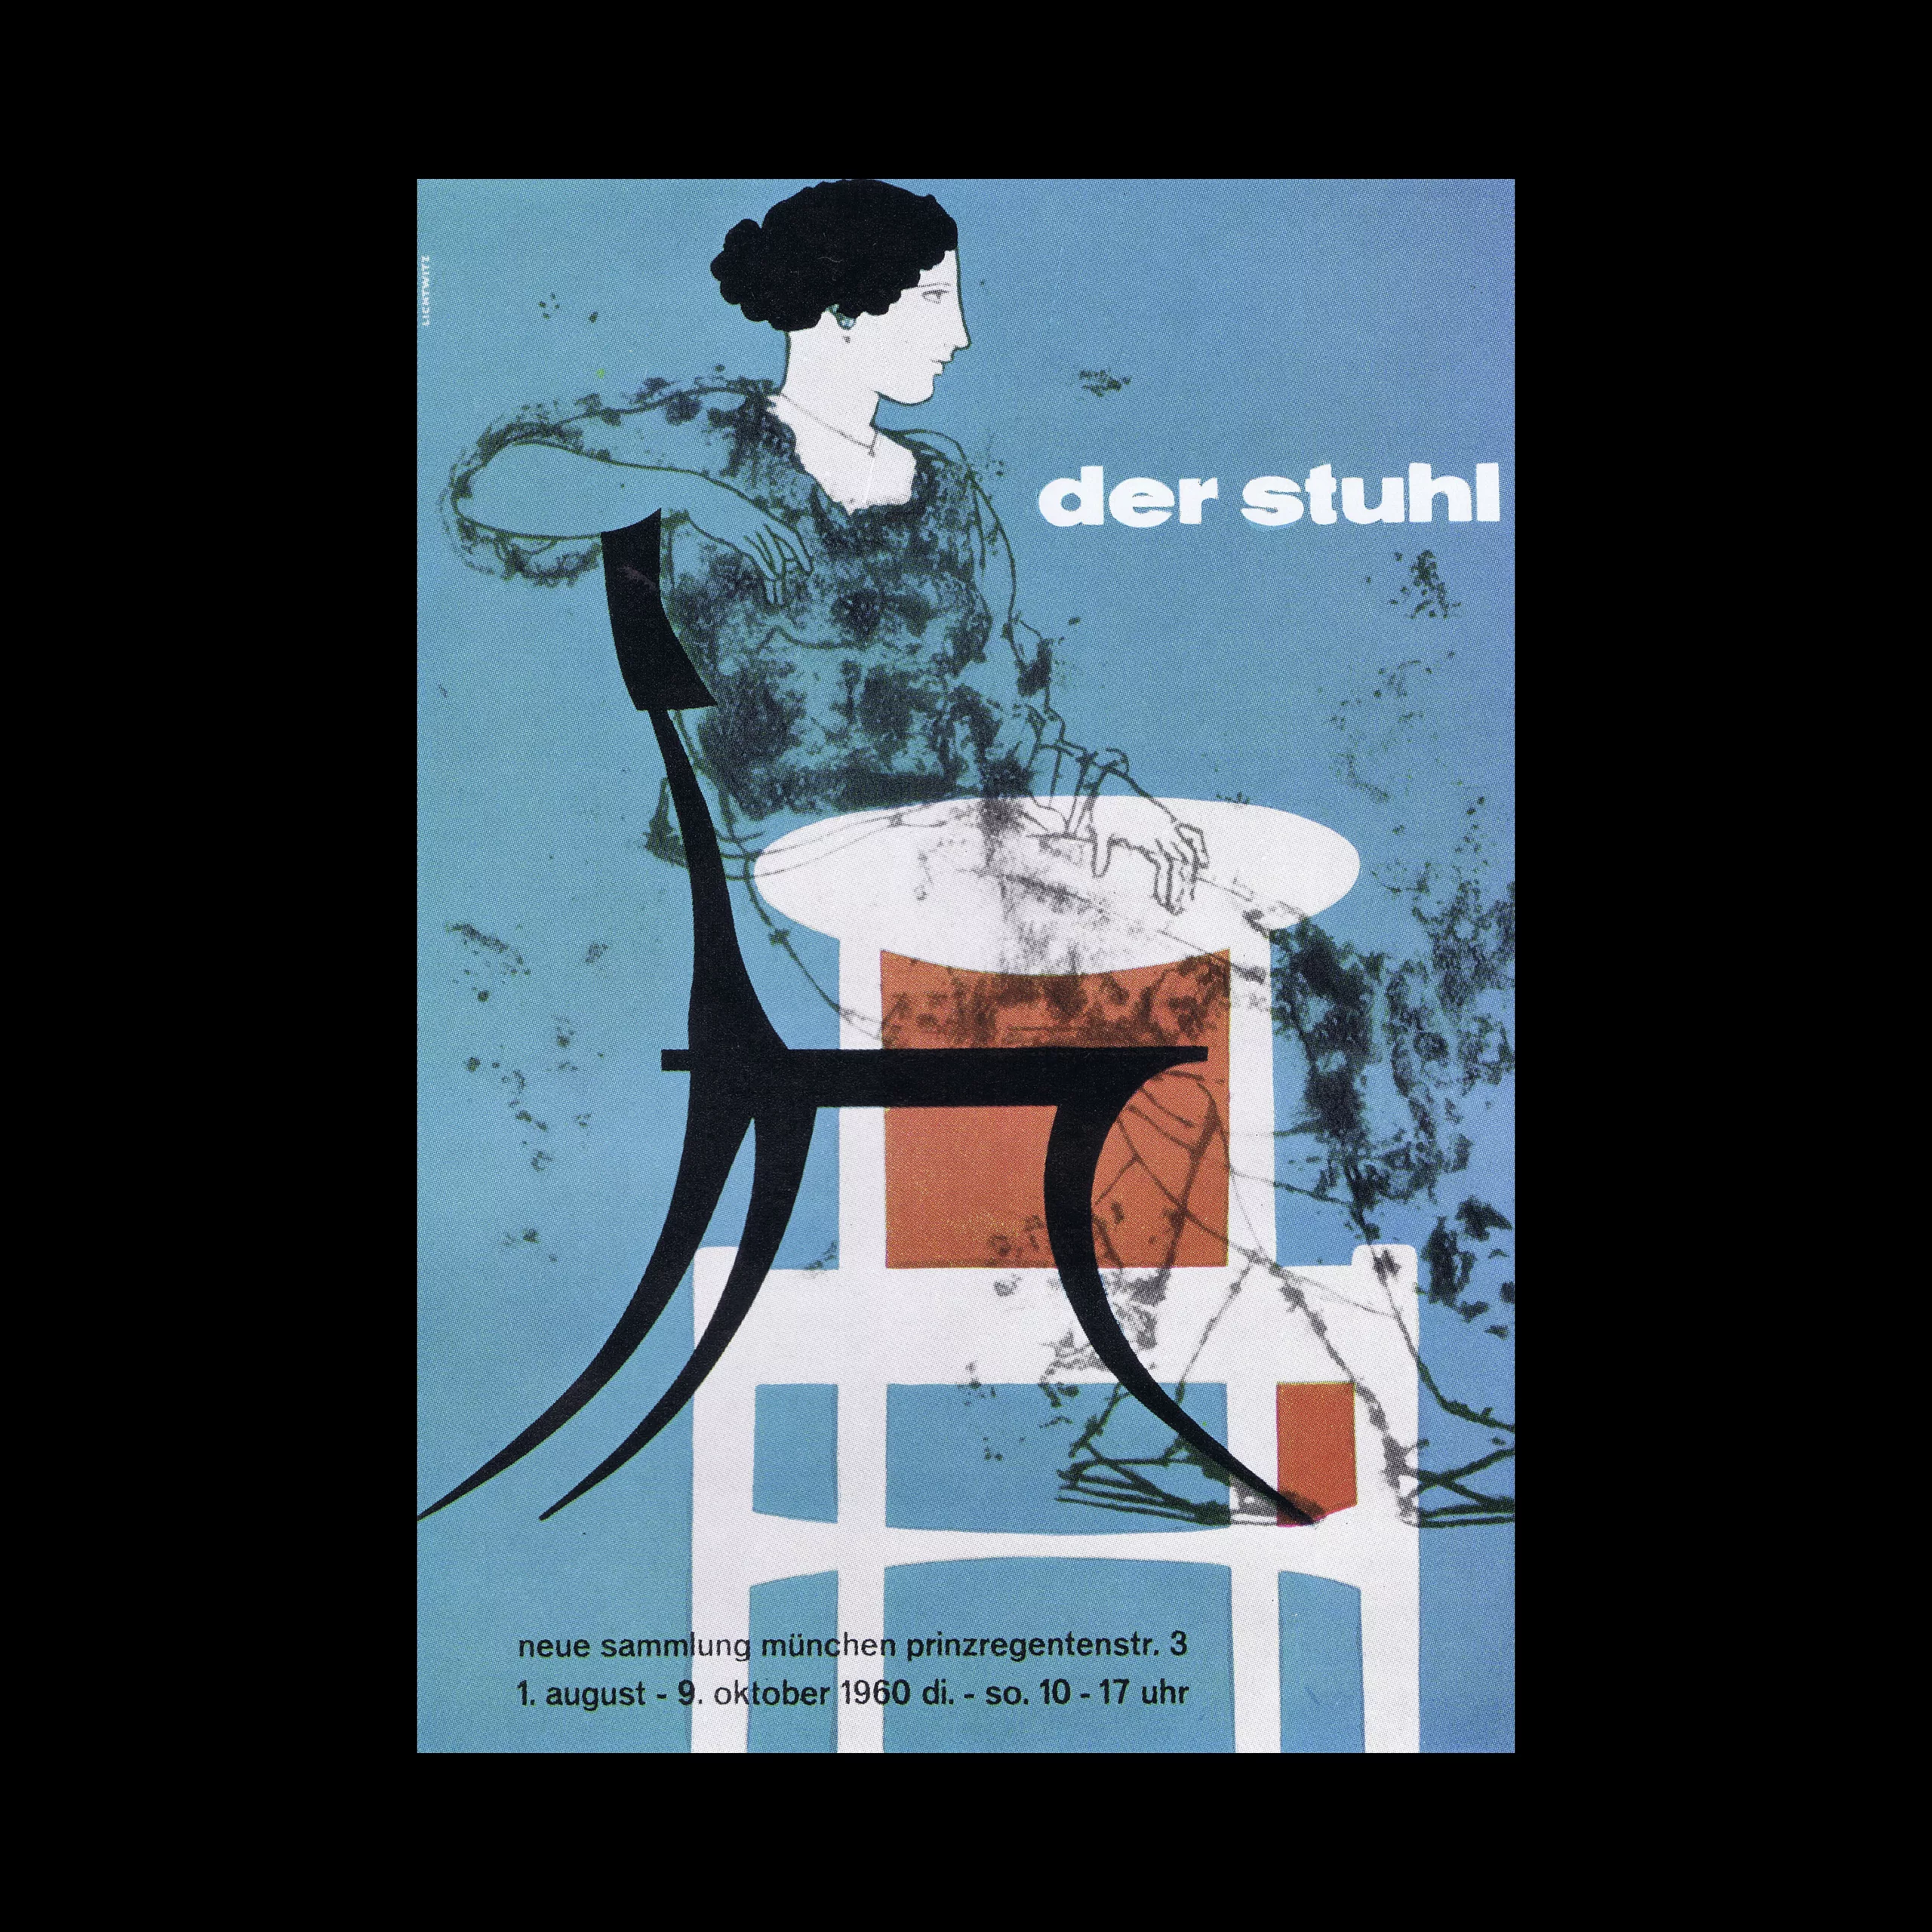 Poster for the exhibition, The Chair designed by Friedmann Lichtwitz, 1960